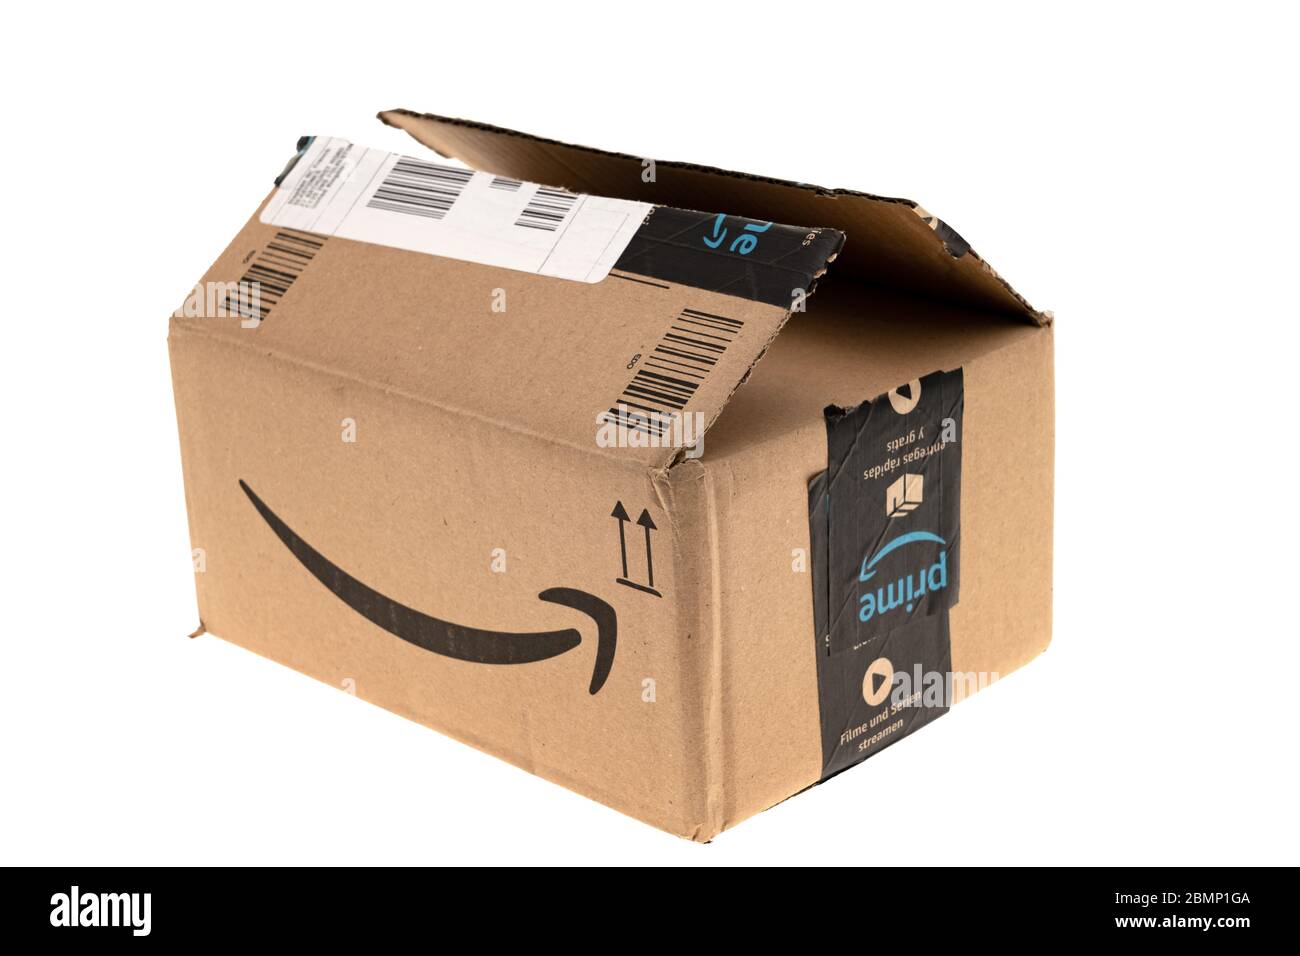 https://c8.alamy.com/comp/2BMP1GA/london-united-kingdom-april-10-2020-opened-amazon-prime-shipping-package-or-box-on-a-white-background-amazoncom-went-online-in-1995-and-is-now-2BMP1GA.jpg